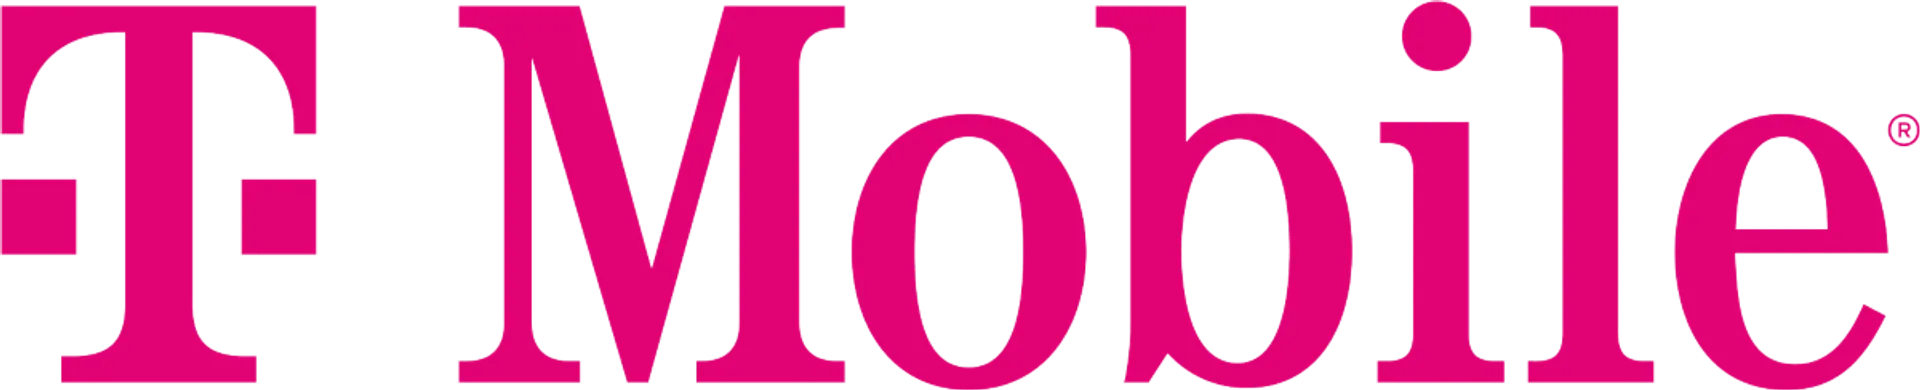 T-MOBILE logo current weekly ad